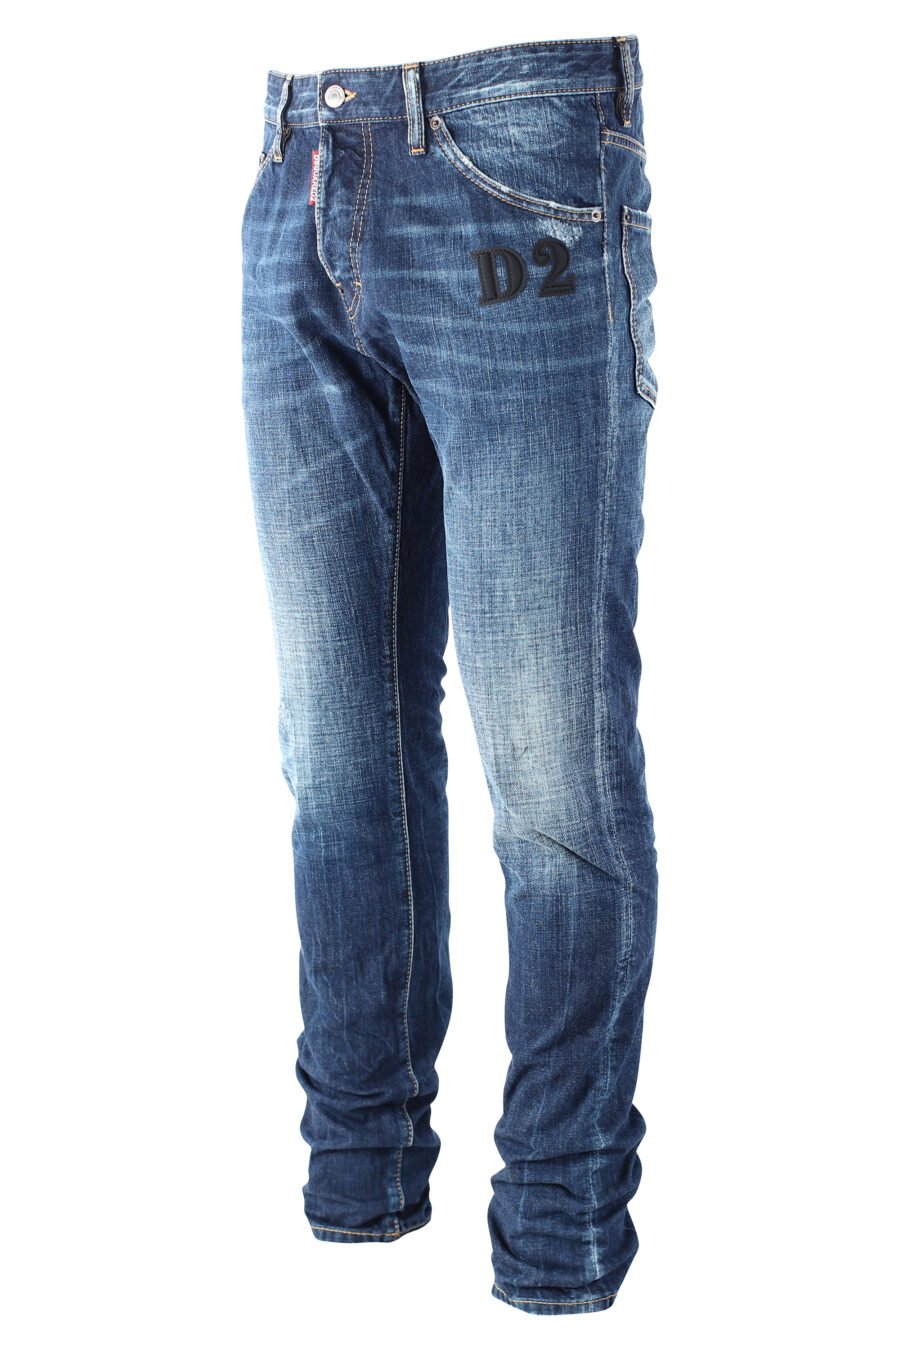 Jeans "cool guy jean" blue with black "D2" logo - IMG 9688